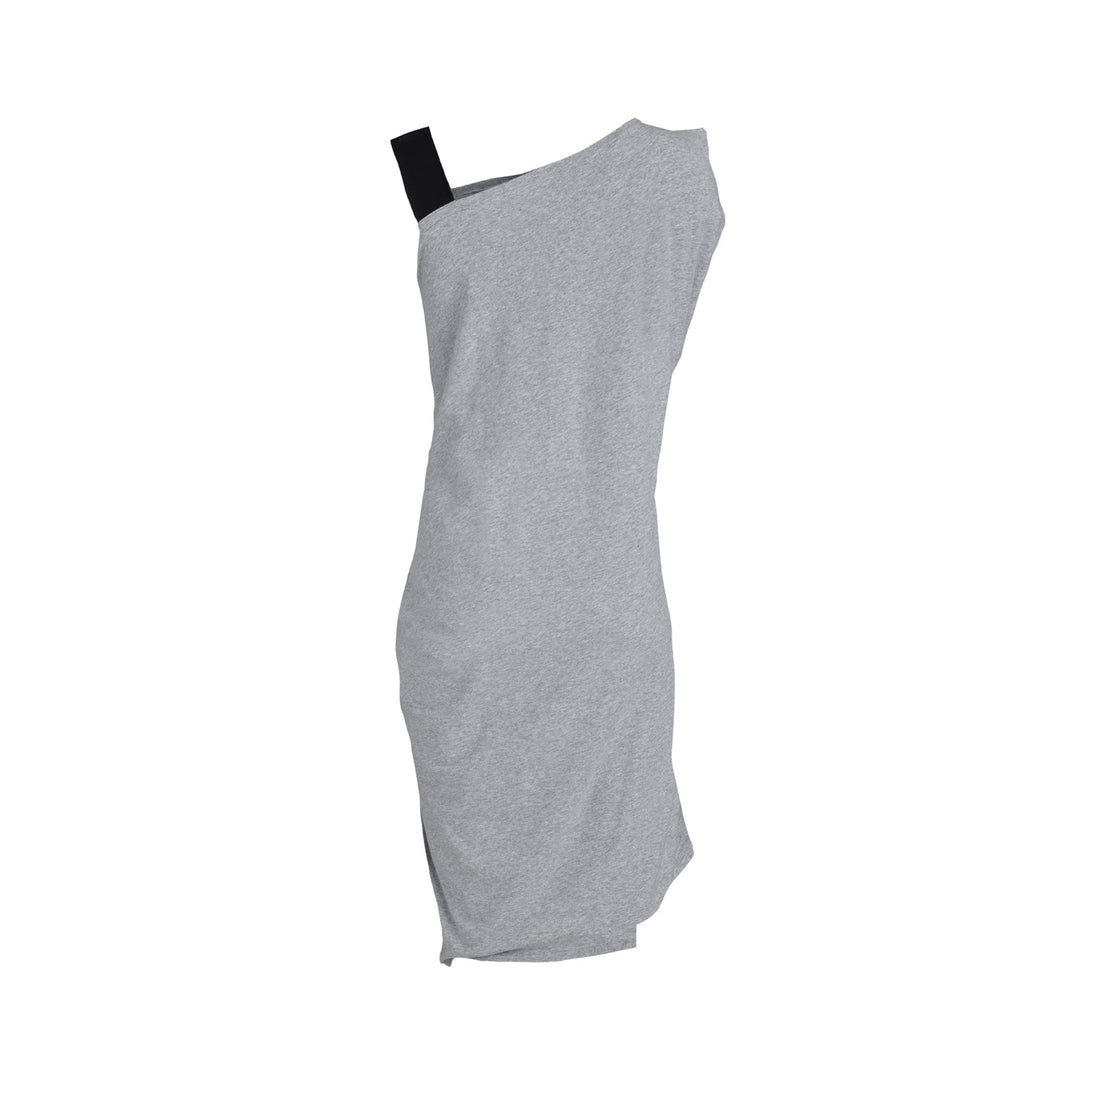 The back view of our grey organic cotton Dress with a black strap by Malaika New York